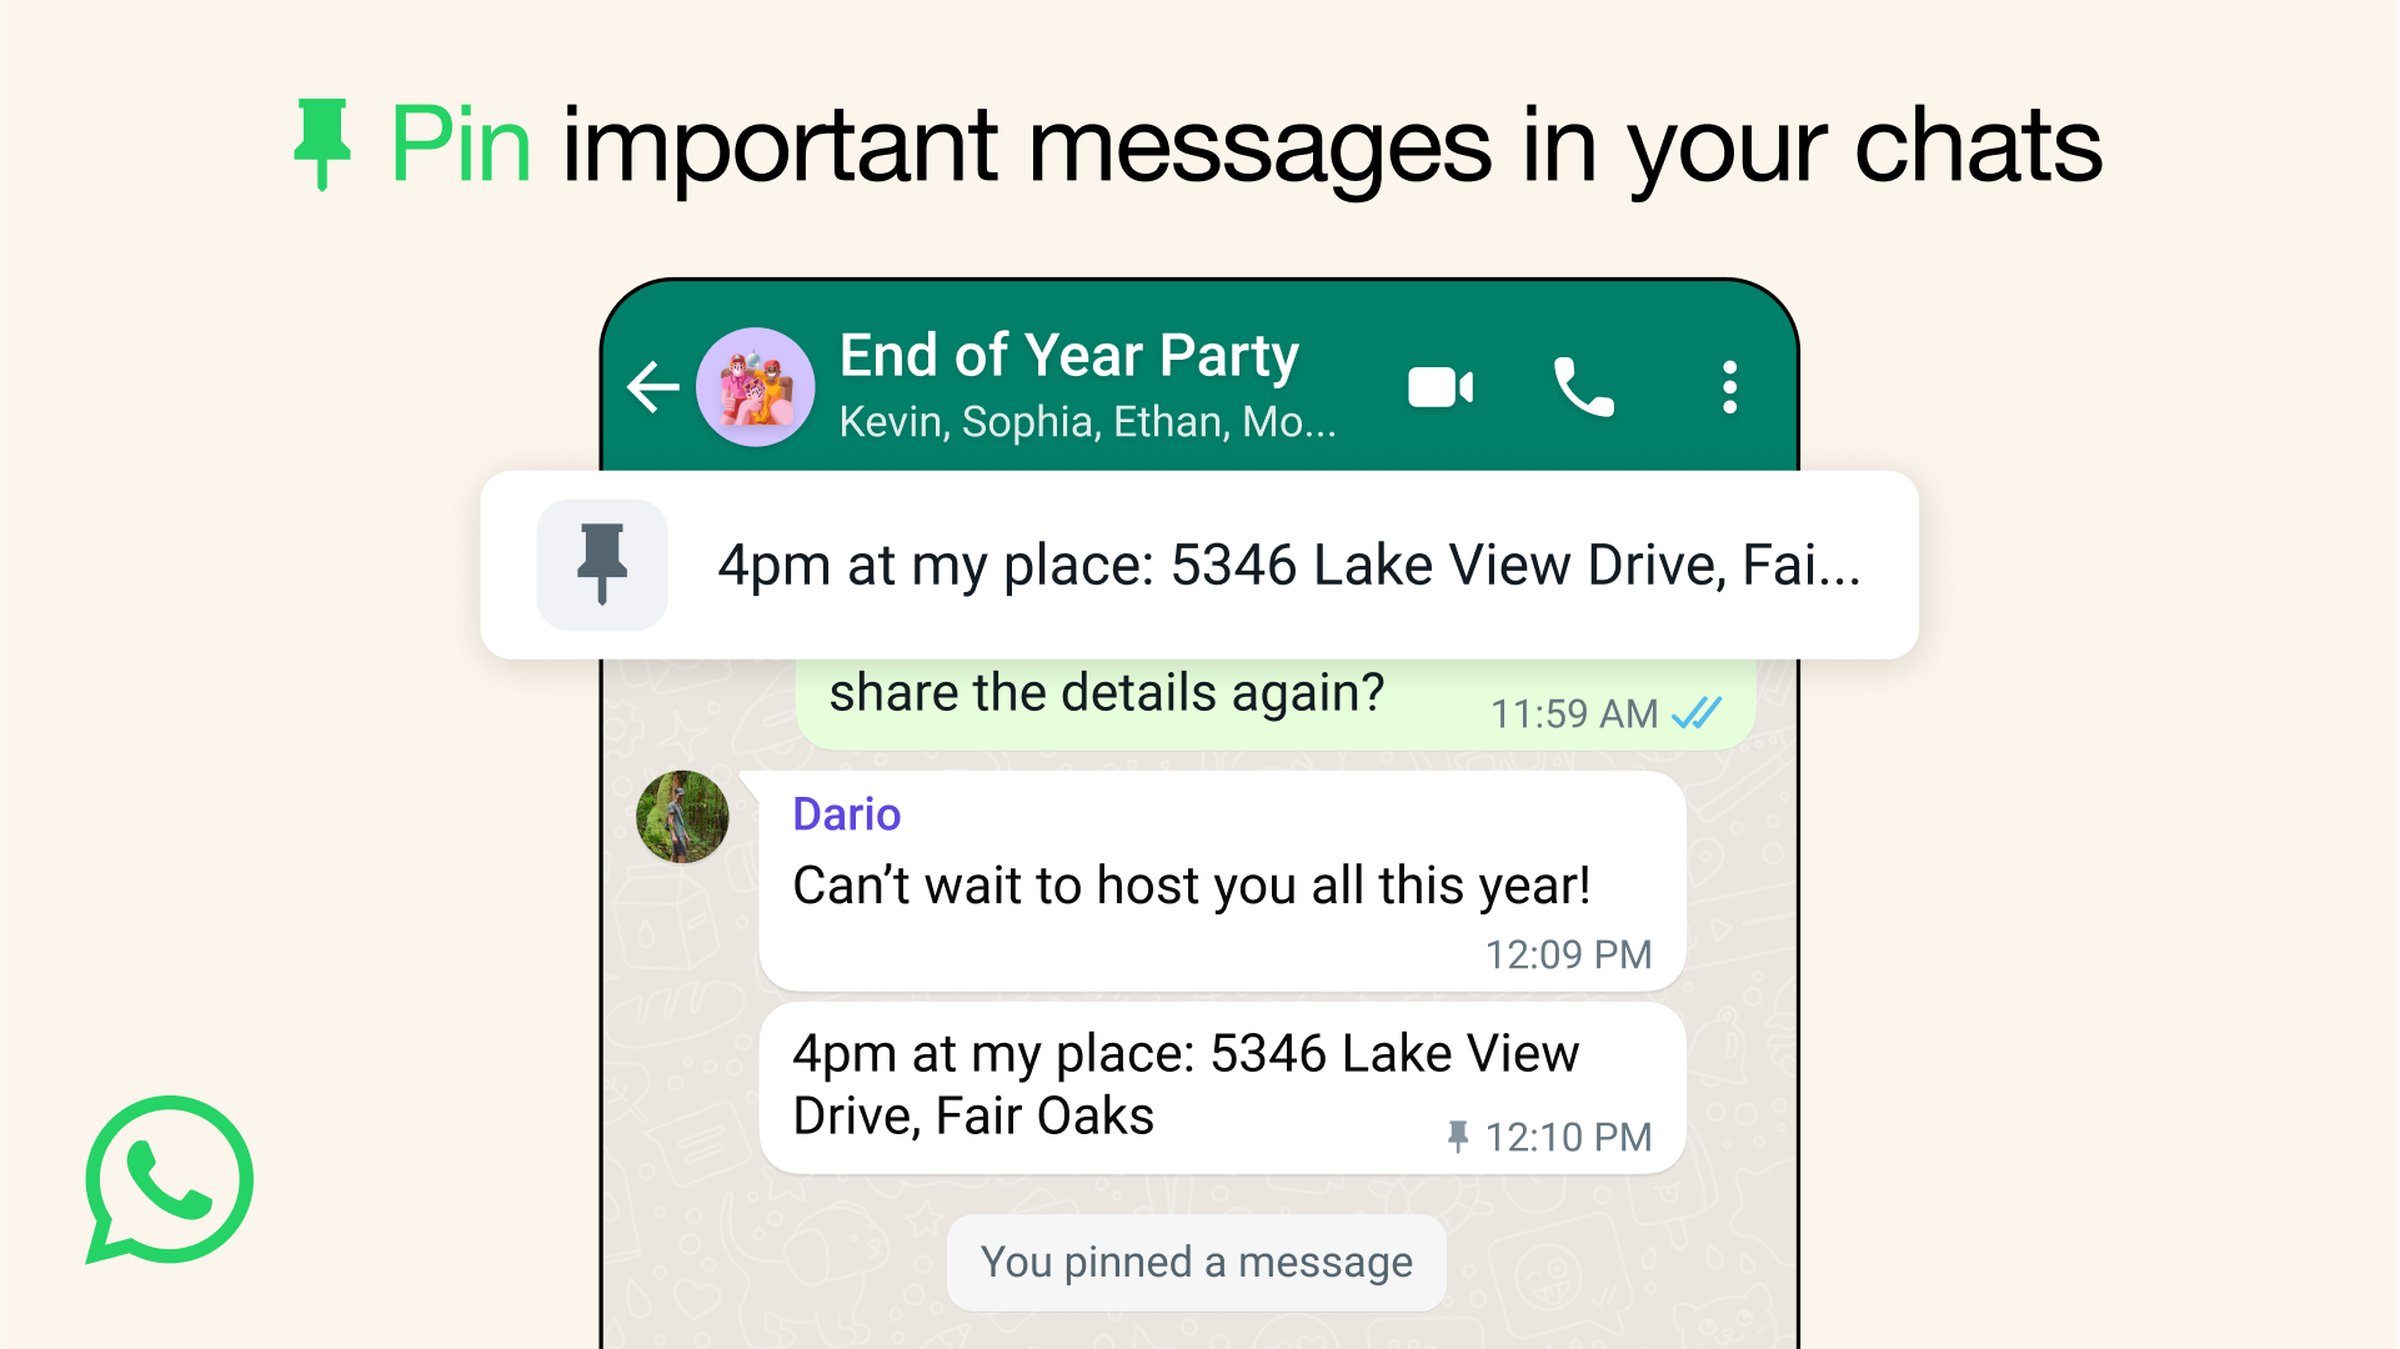 A picture showing what pinned messages look like in WhatsApp.